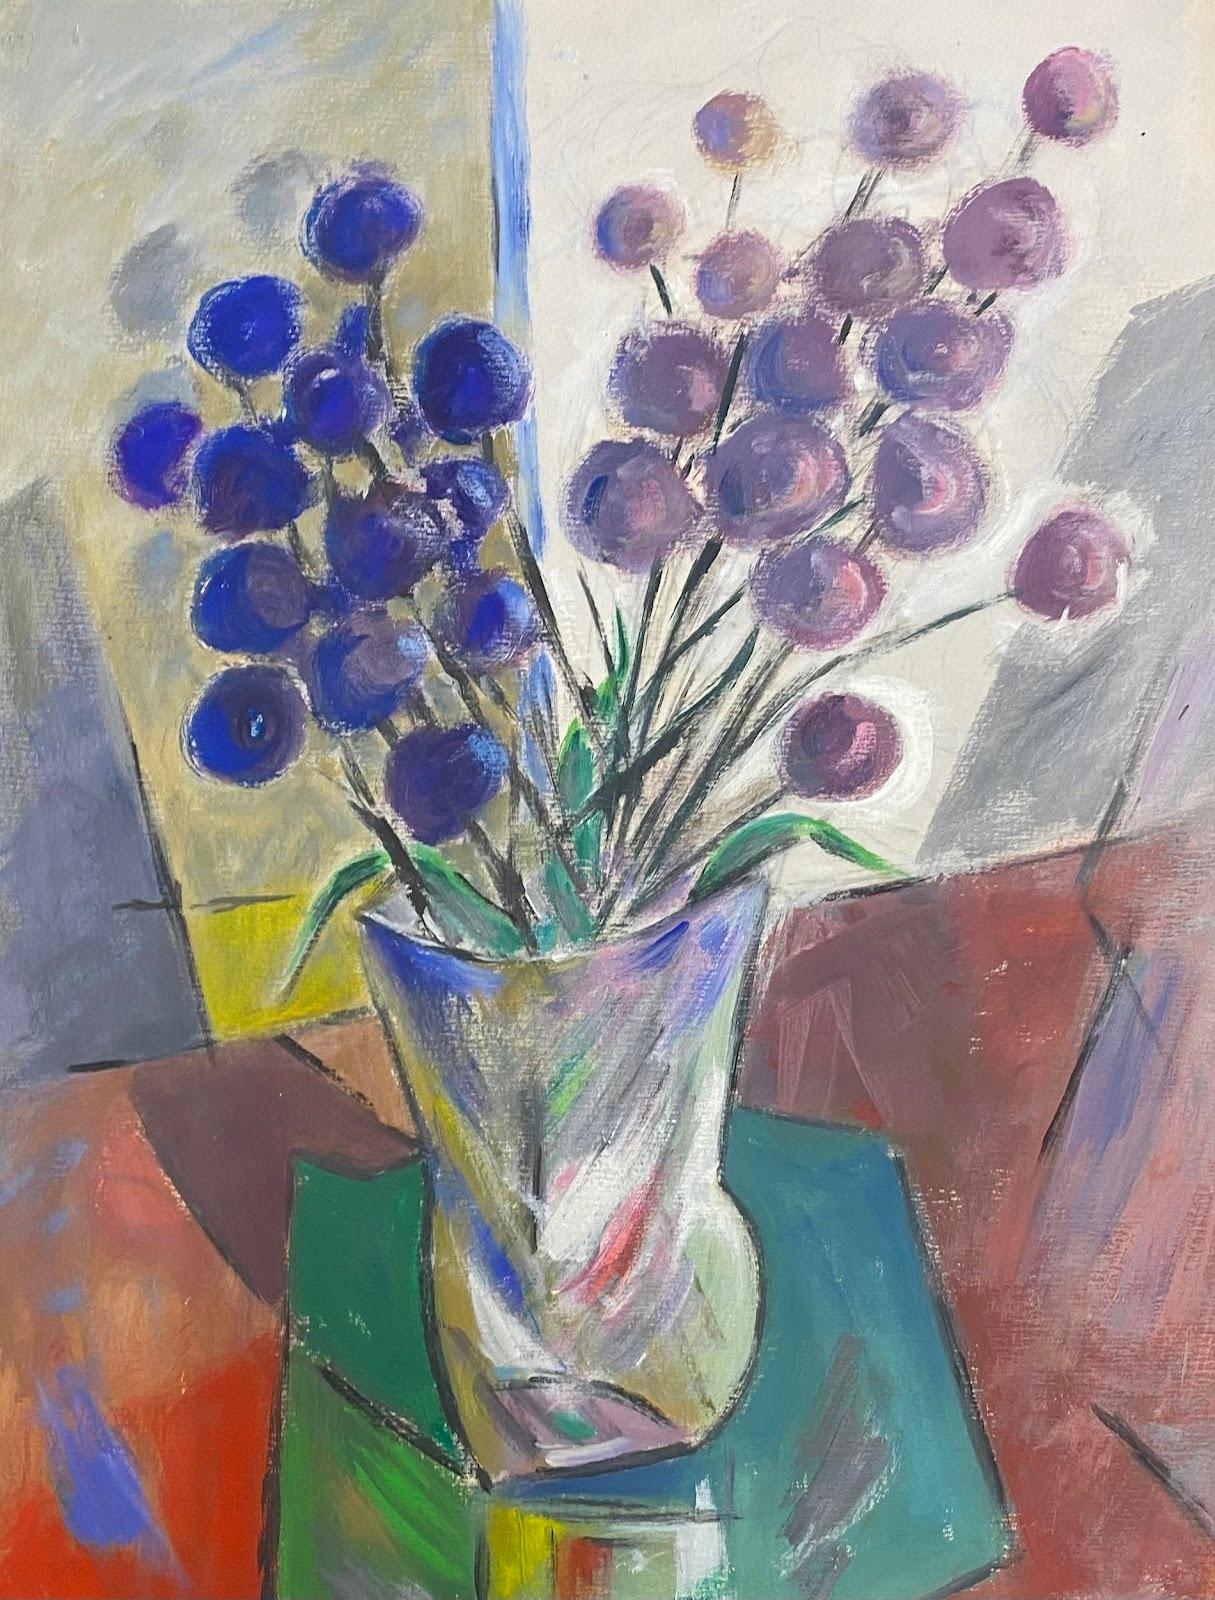 Paul-Louis Bolot (French 1918-2003) Figurative Painting - 1960's French Painting Blue And Purple Allium Flowers Arranged In A Glass Vase